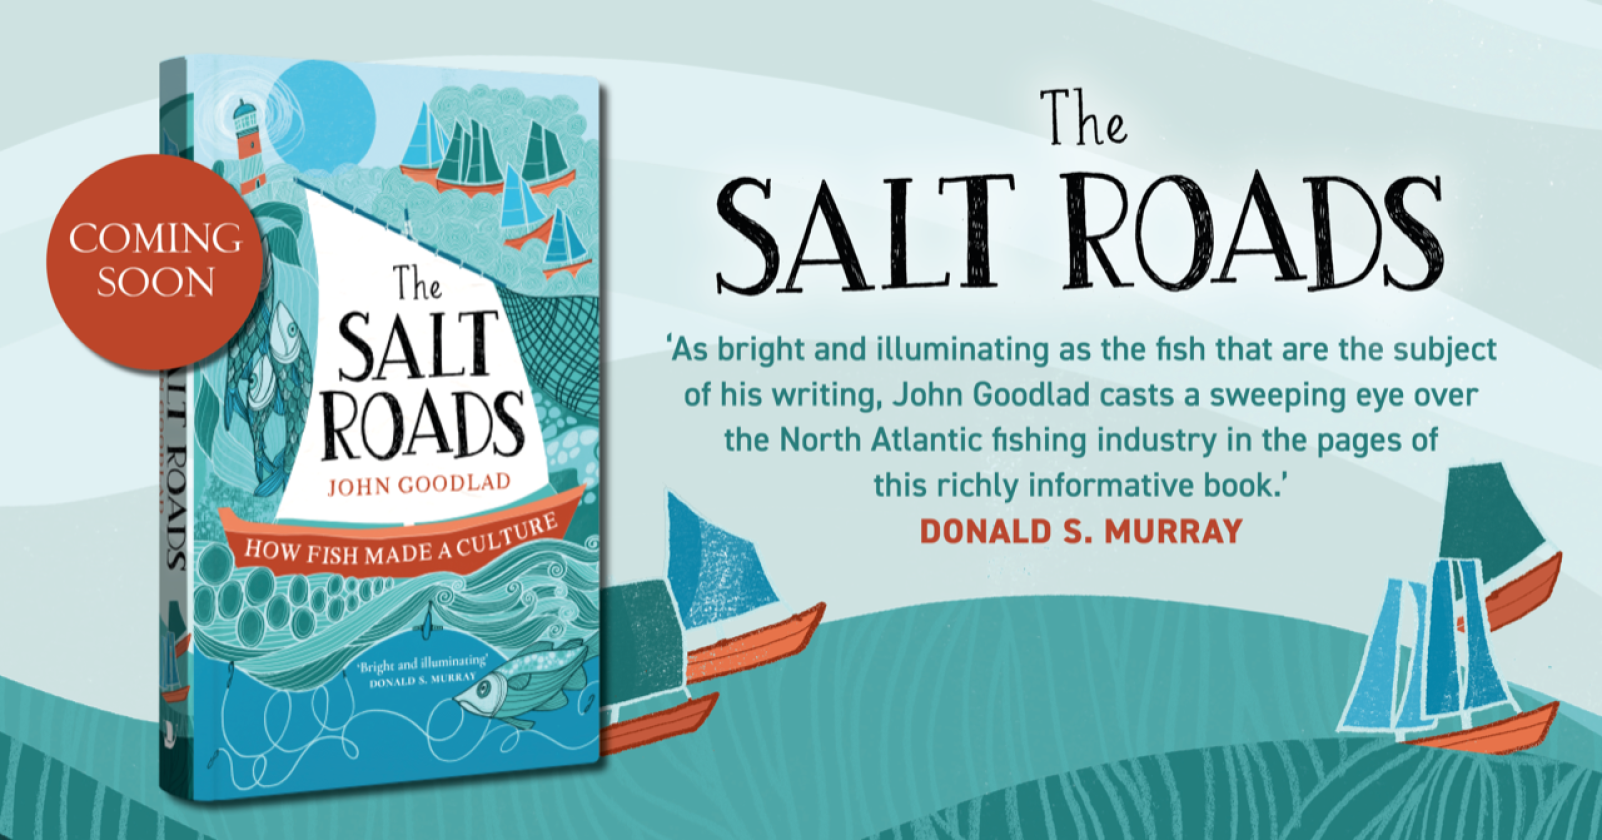 The Salt Roads book cover and review